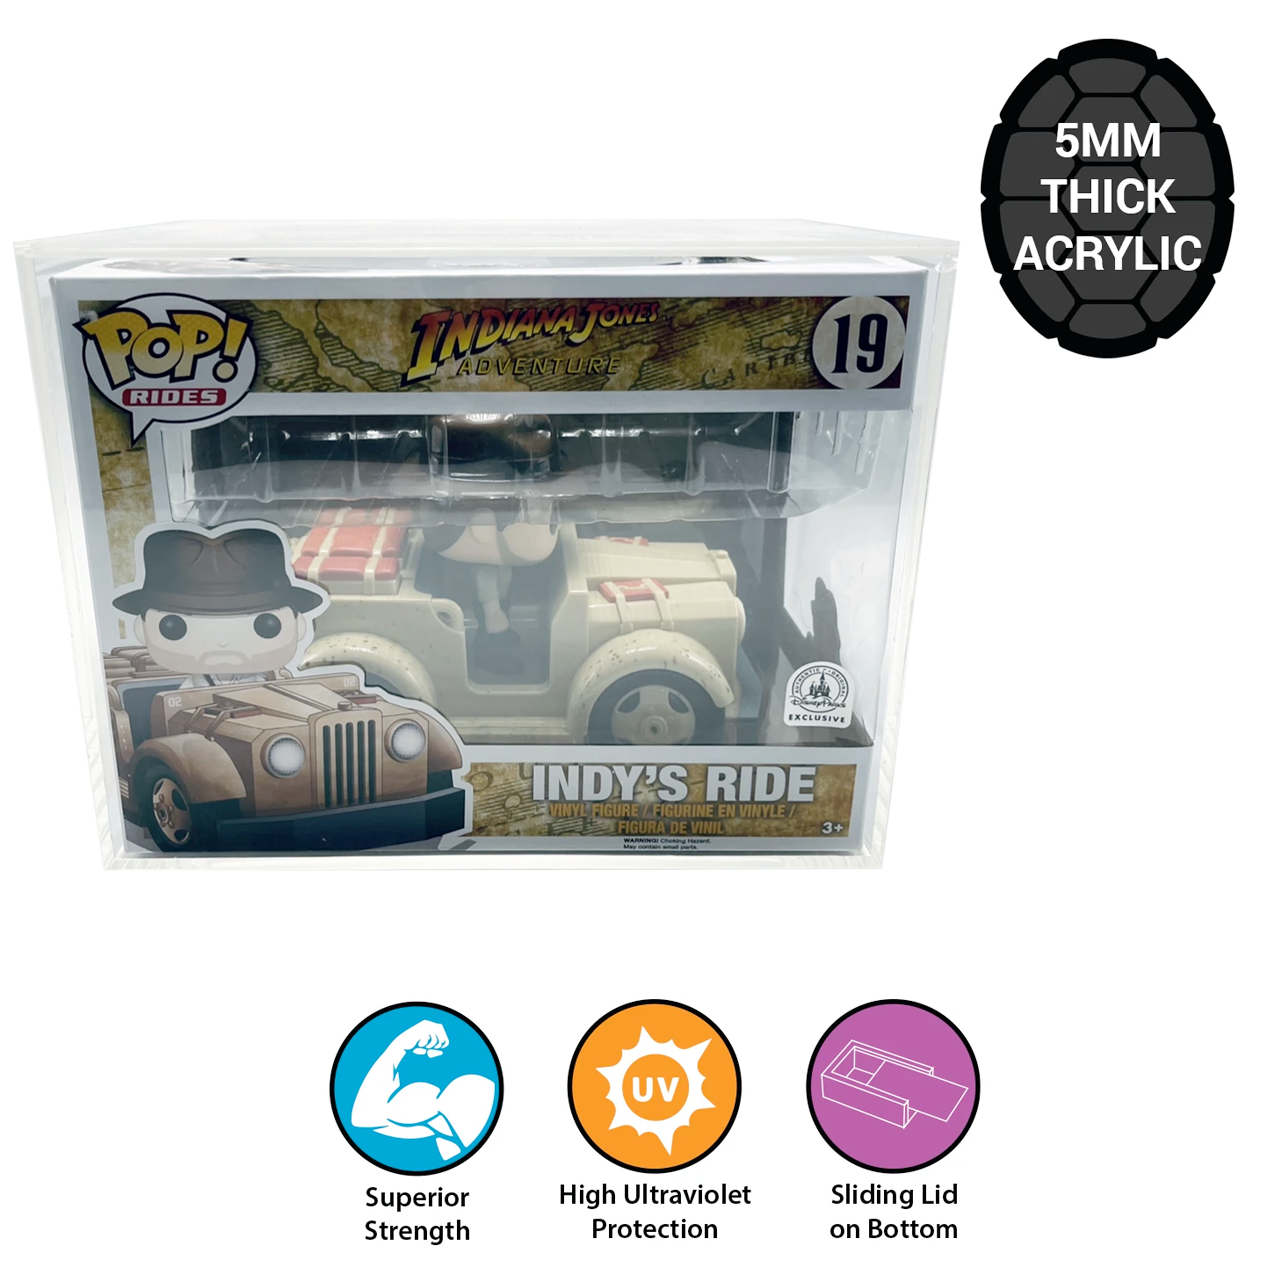 POP RIDES (LARGE) ACRYLIC Case for Funko Pop Vinyl Collectible Figures, 5mm thick (UV Resistant & Slide Bottom)